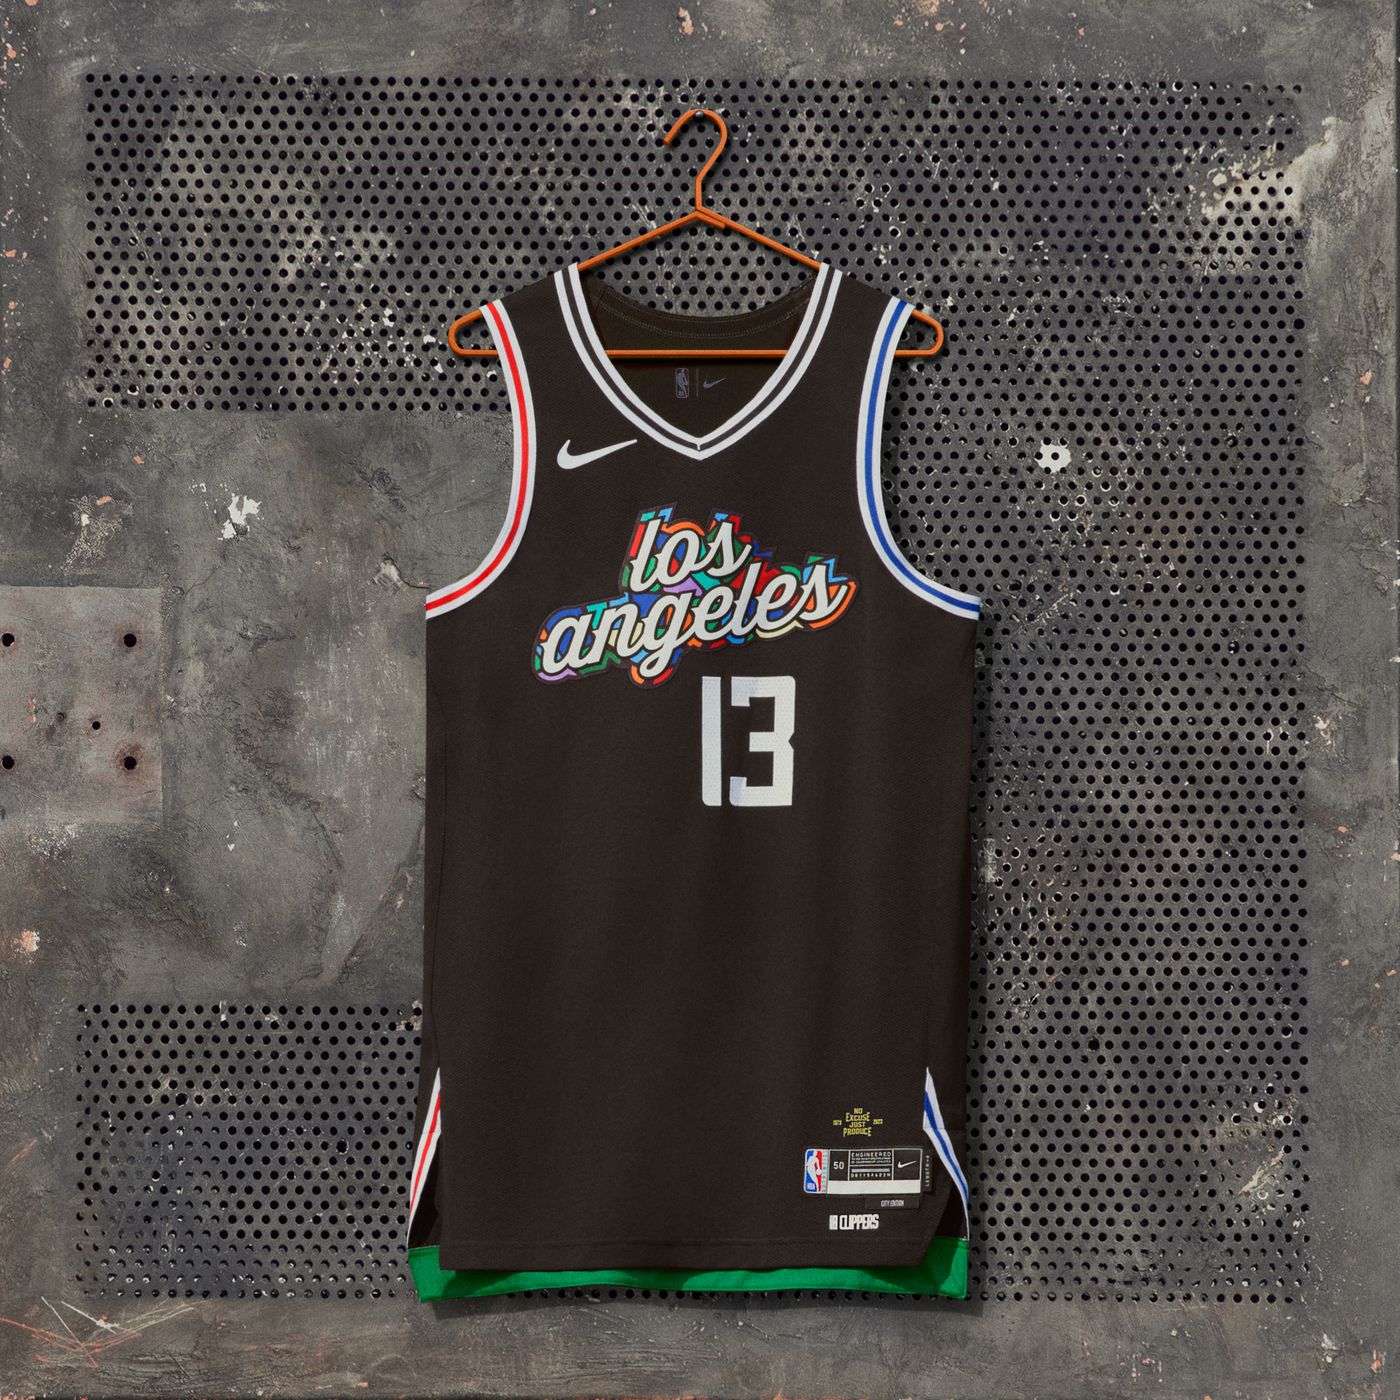 These are the new jerseys and kits for every NBA team for the 2023